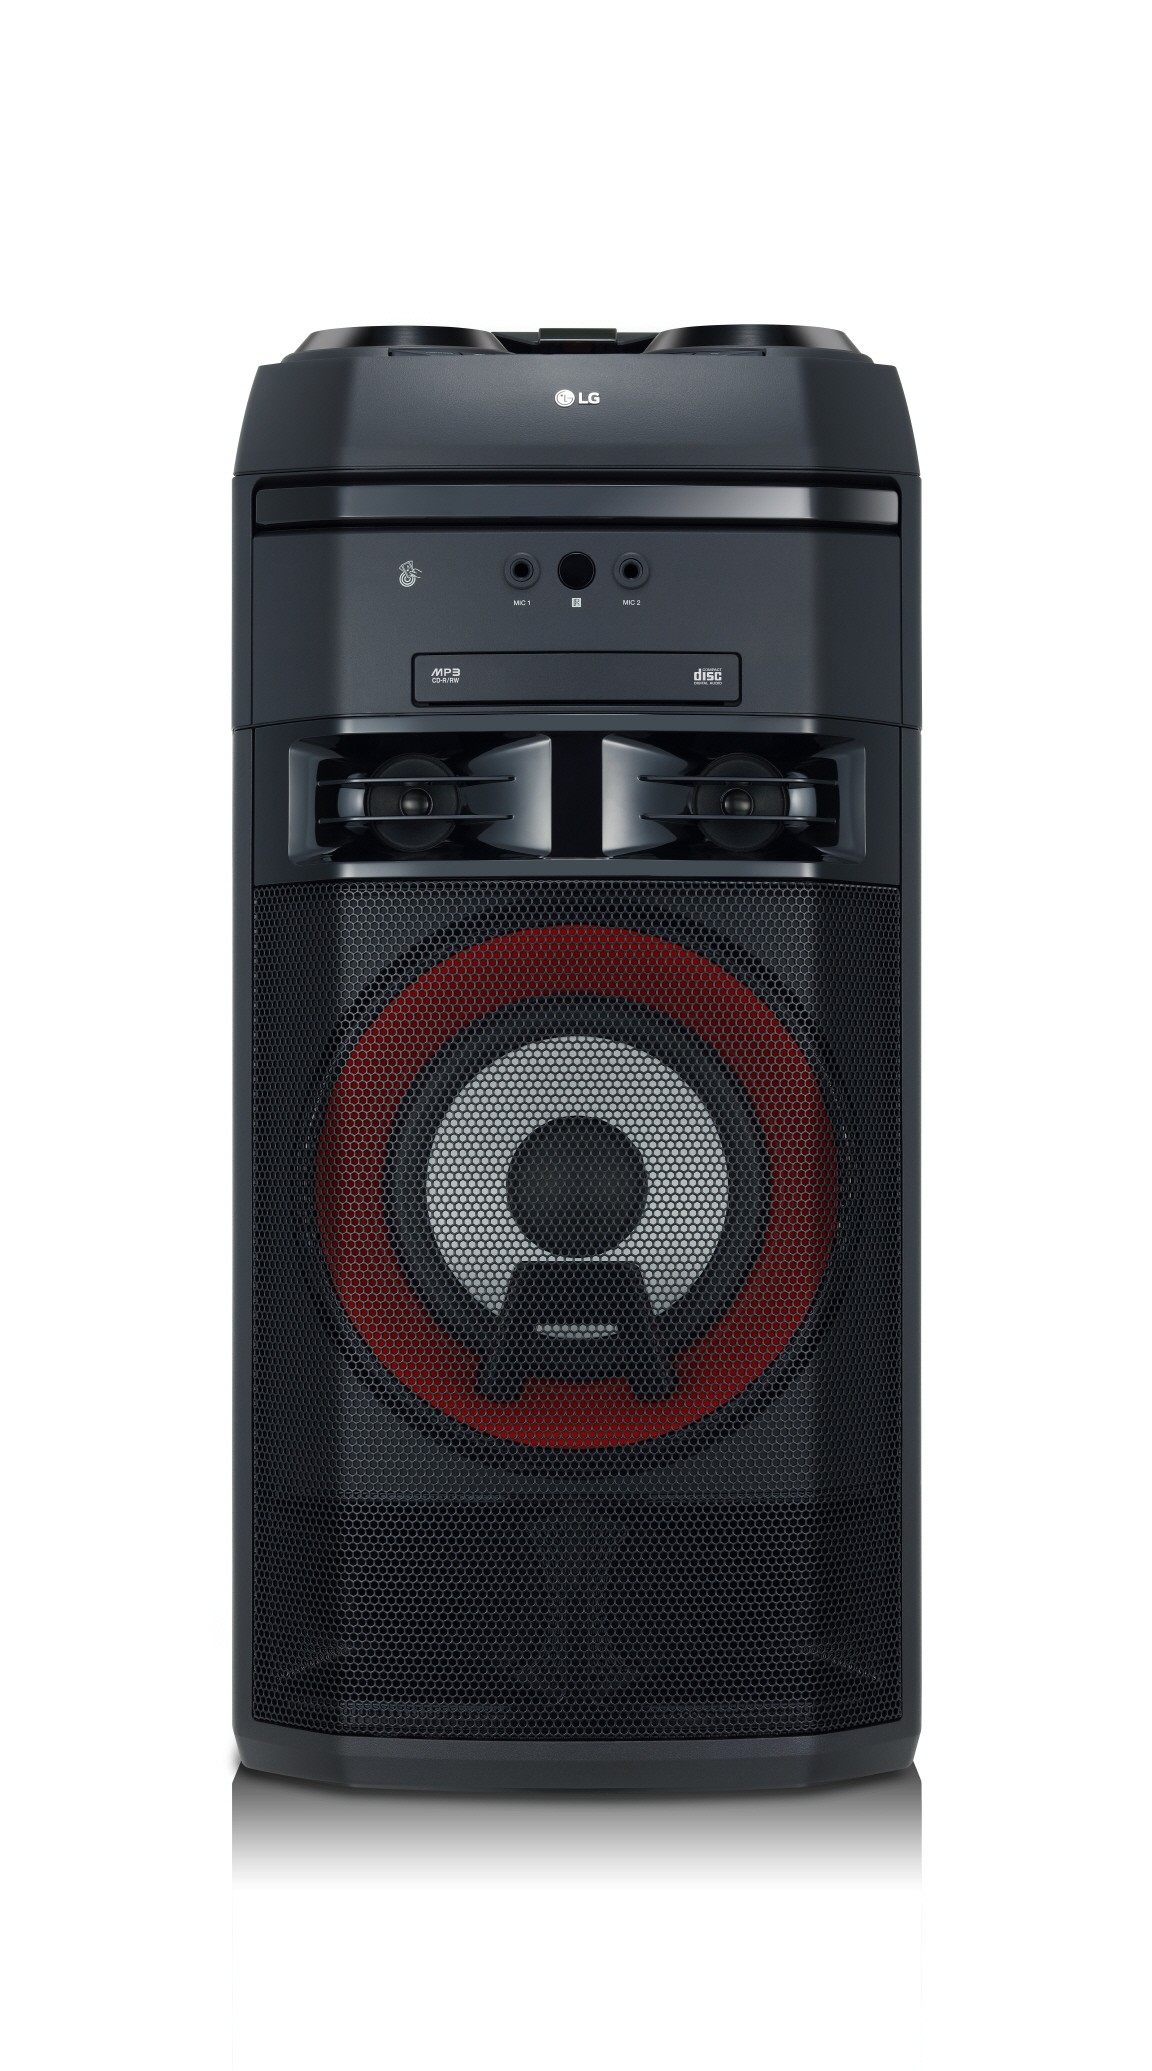 A front view of LG XBOOM model OL55